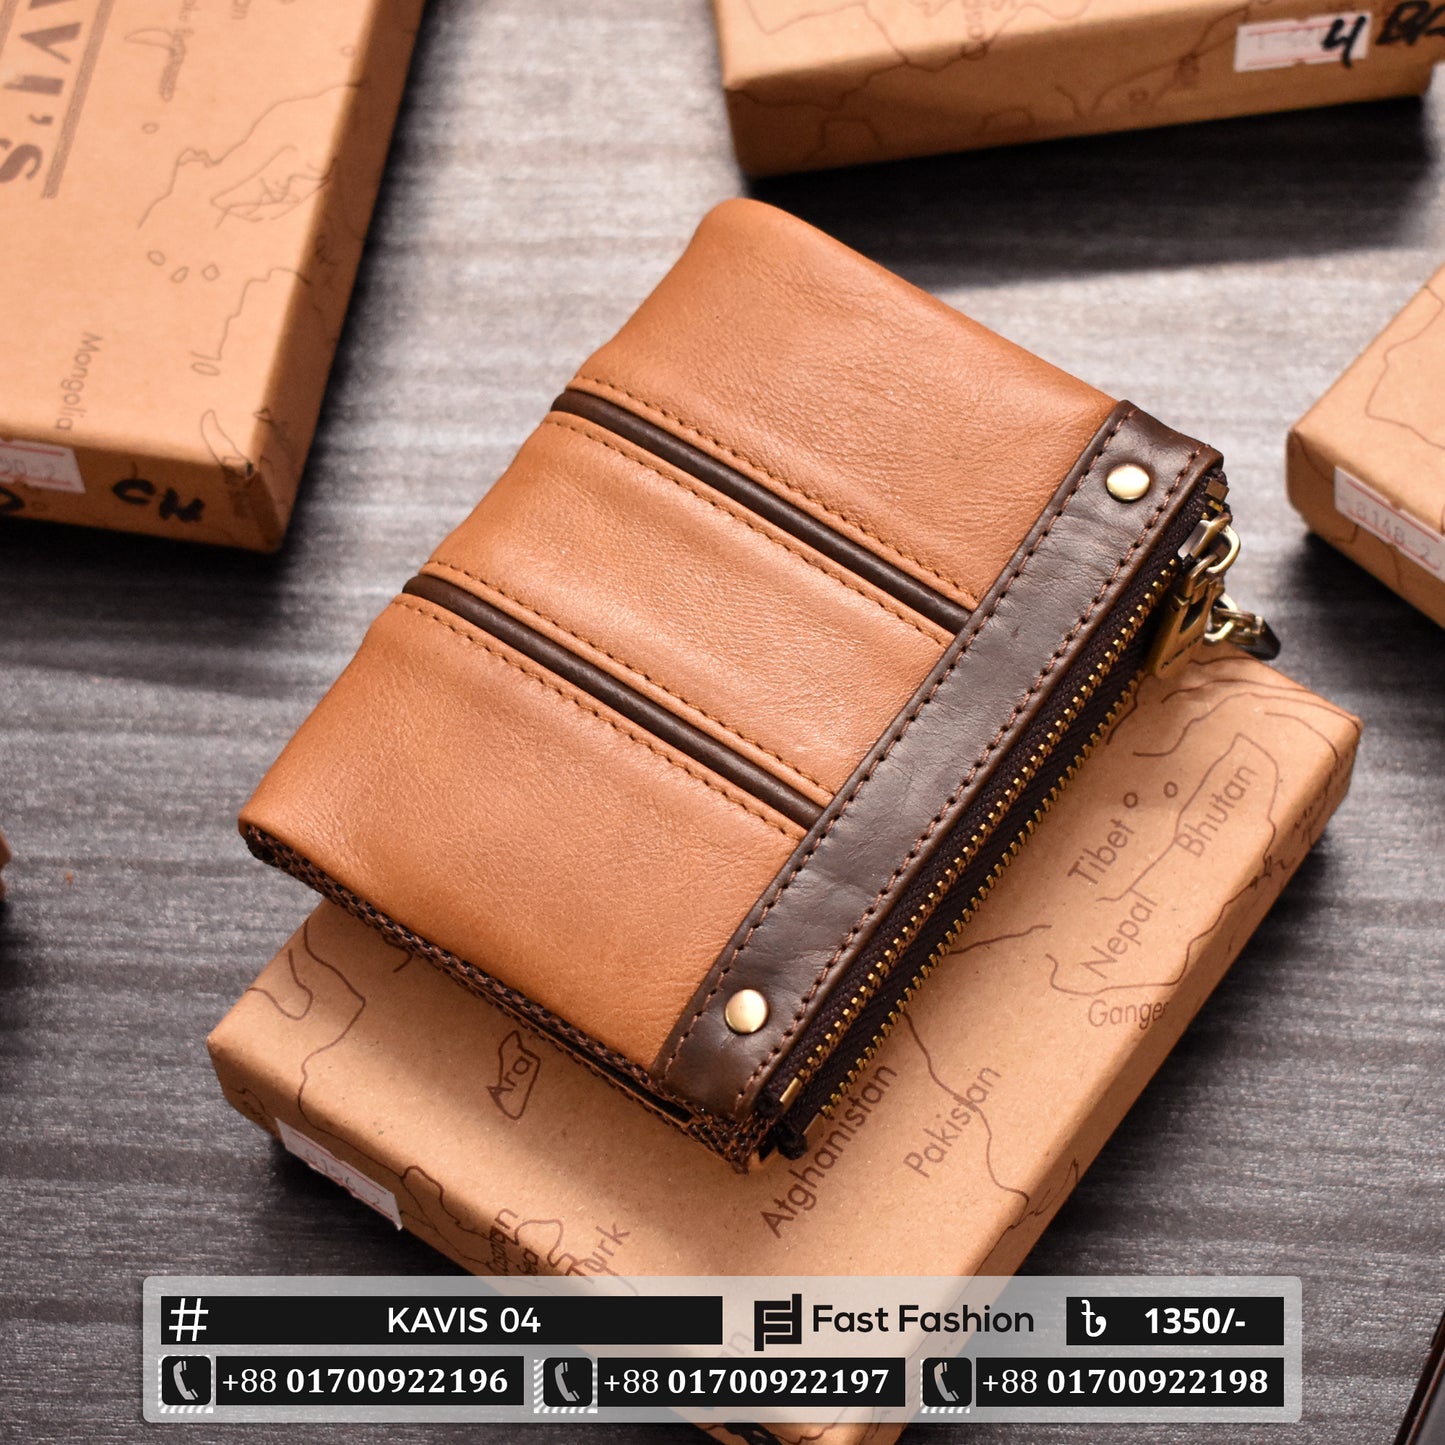 Original KAVI's Leather Wallet | Original Leather Imported From China | KAVIS 04